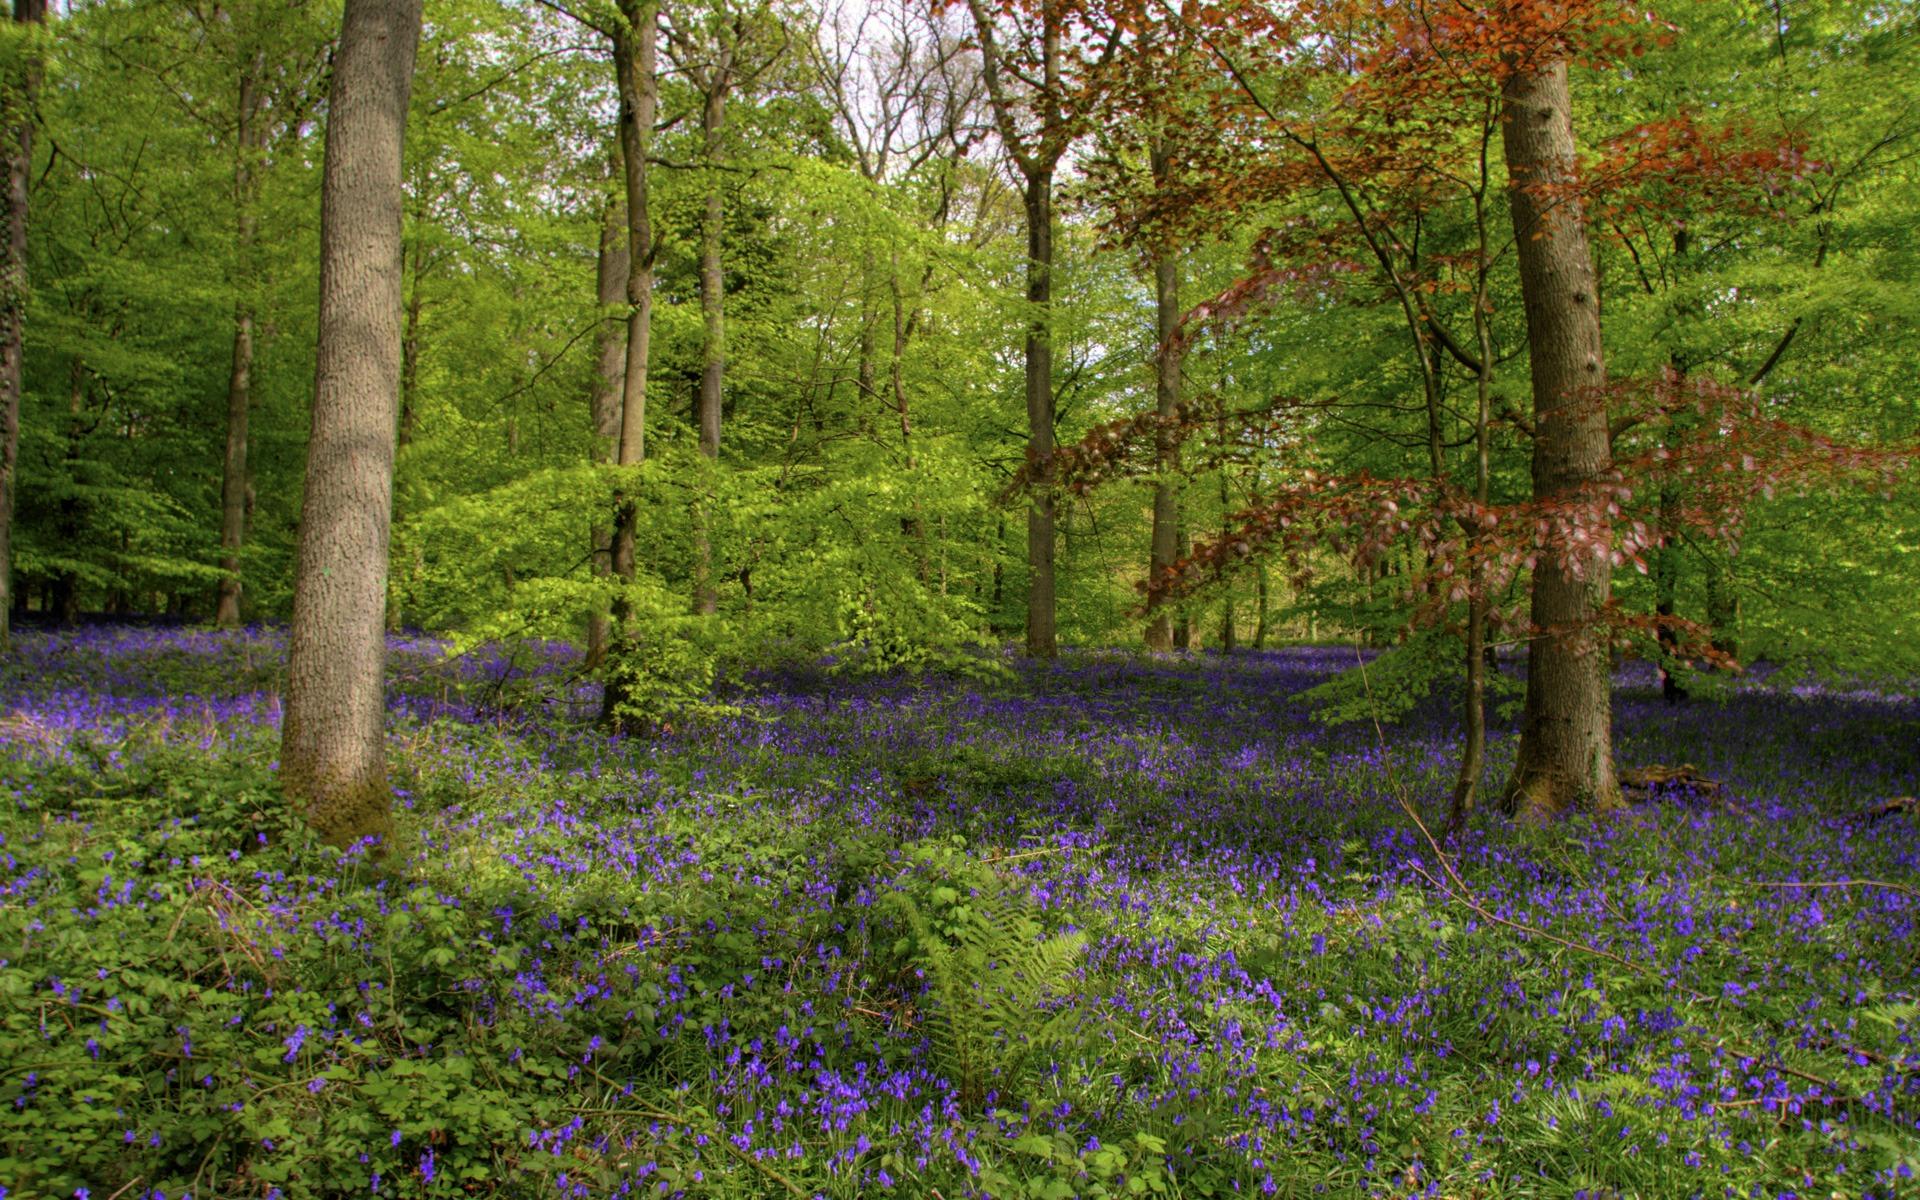 Bluebells In A Beautiful Forest - Forest Of Dean Woodland - HD Wallpaper 